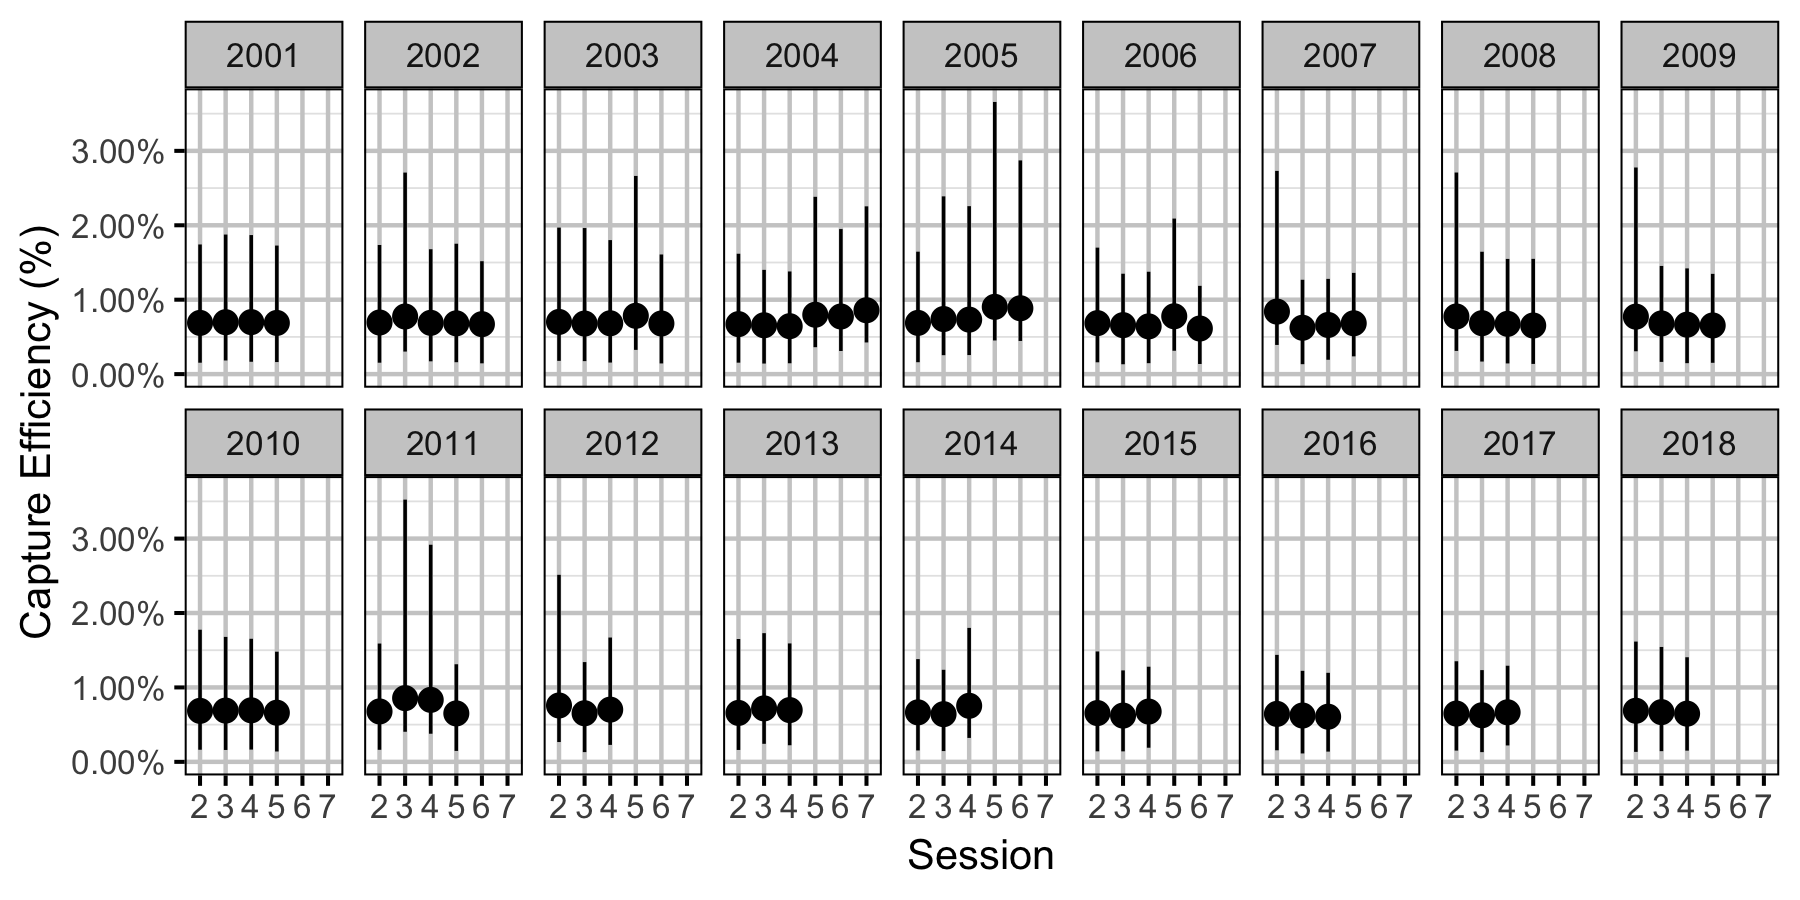 figures/efficiency/MW/Subadult/session-year.png